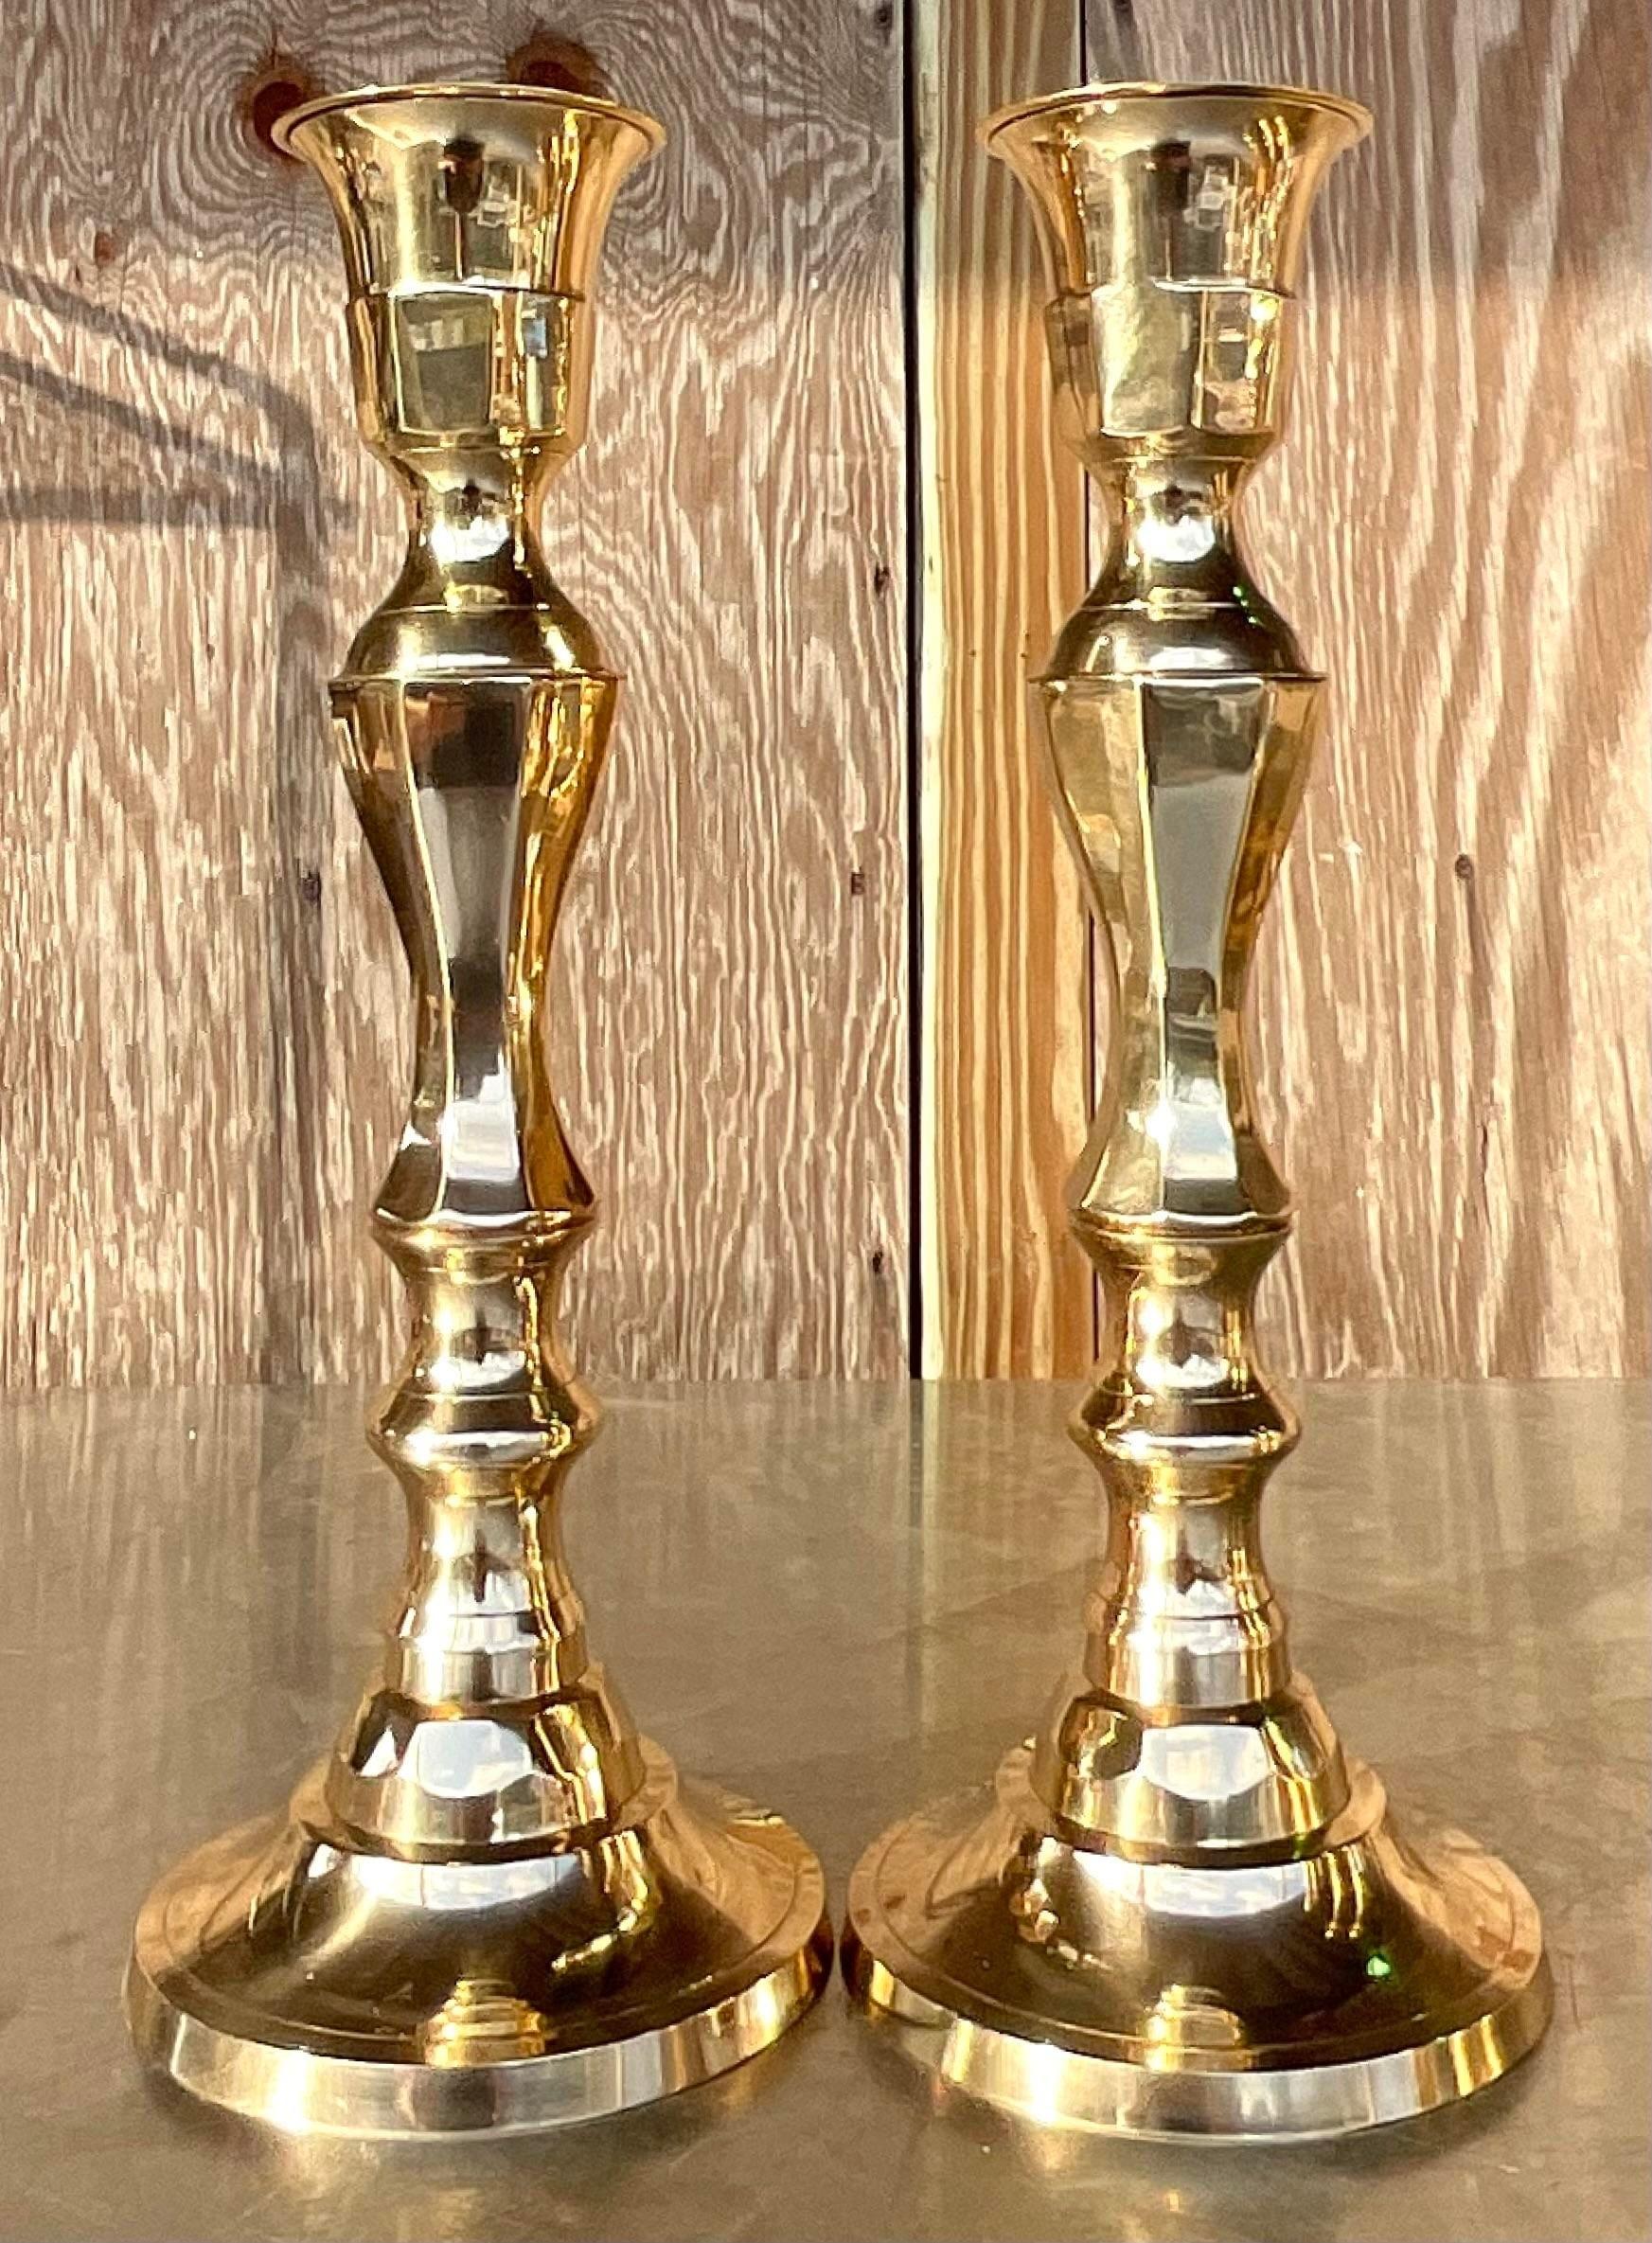 Philippine Vintage Regency Faceted Polished Brass Candlesticks - a Pair For Sale